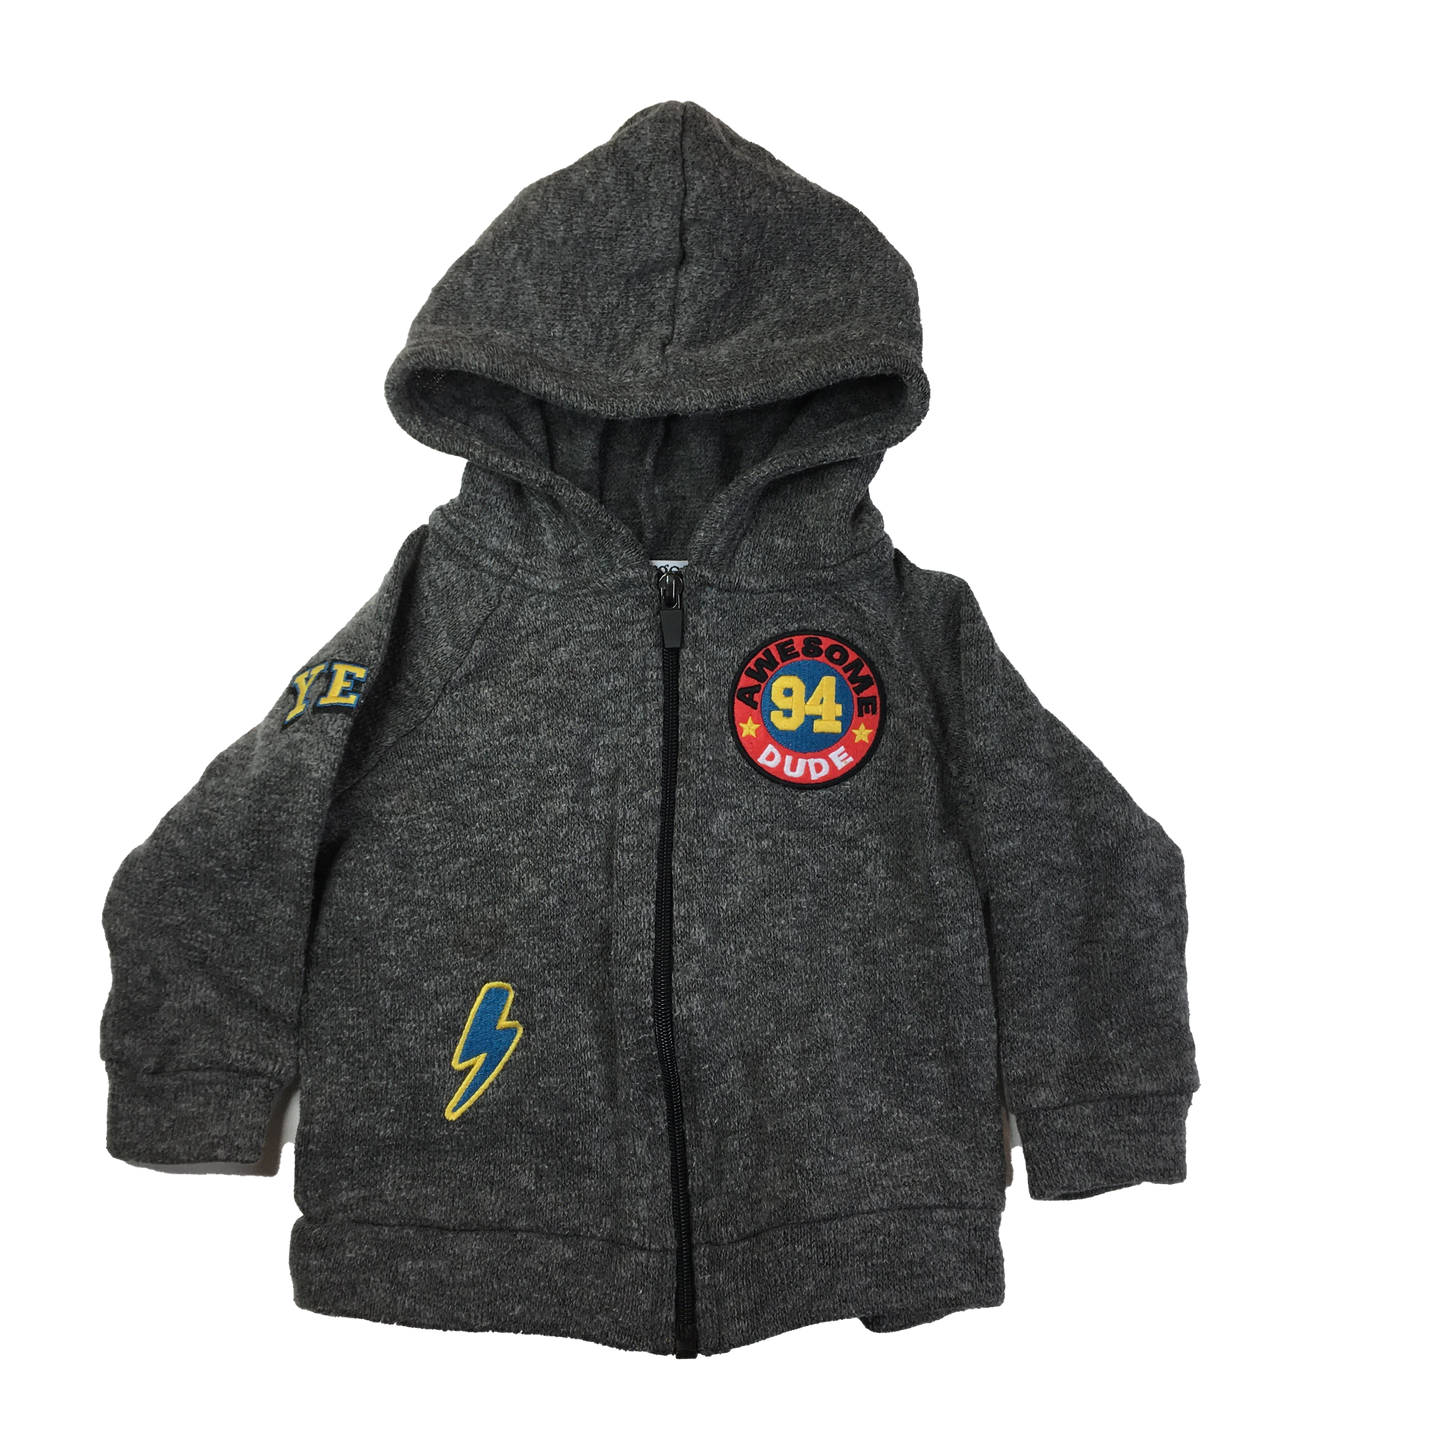 George Grey Hooded Zip-Up with "Awesome Dude" Patches 2T